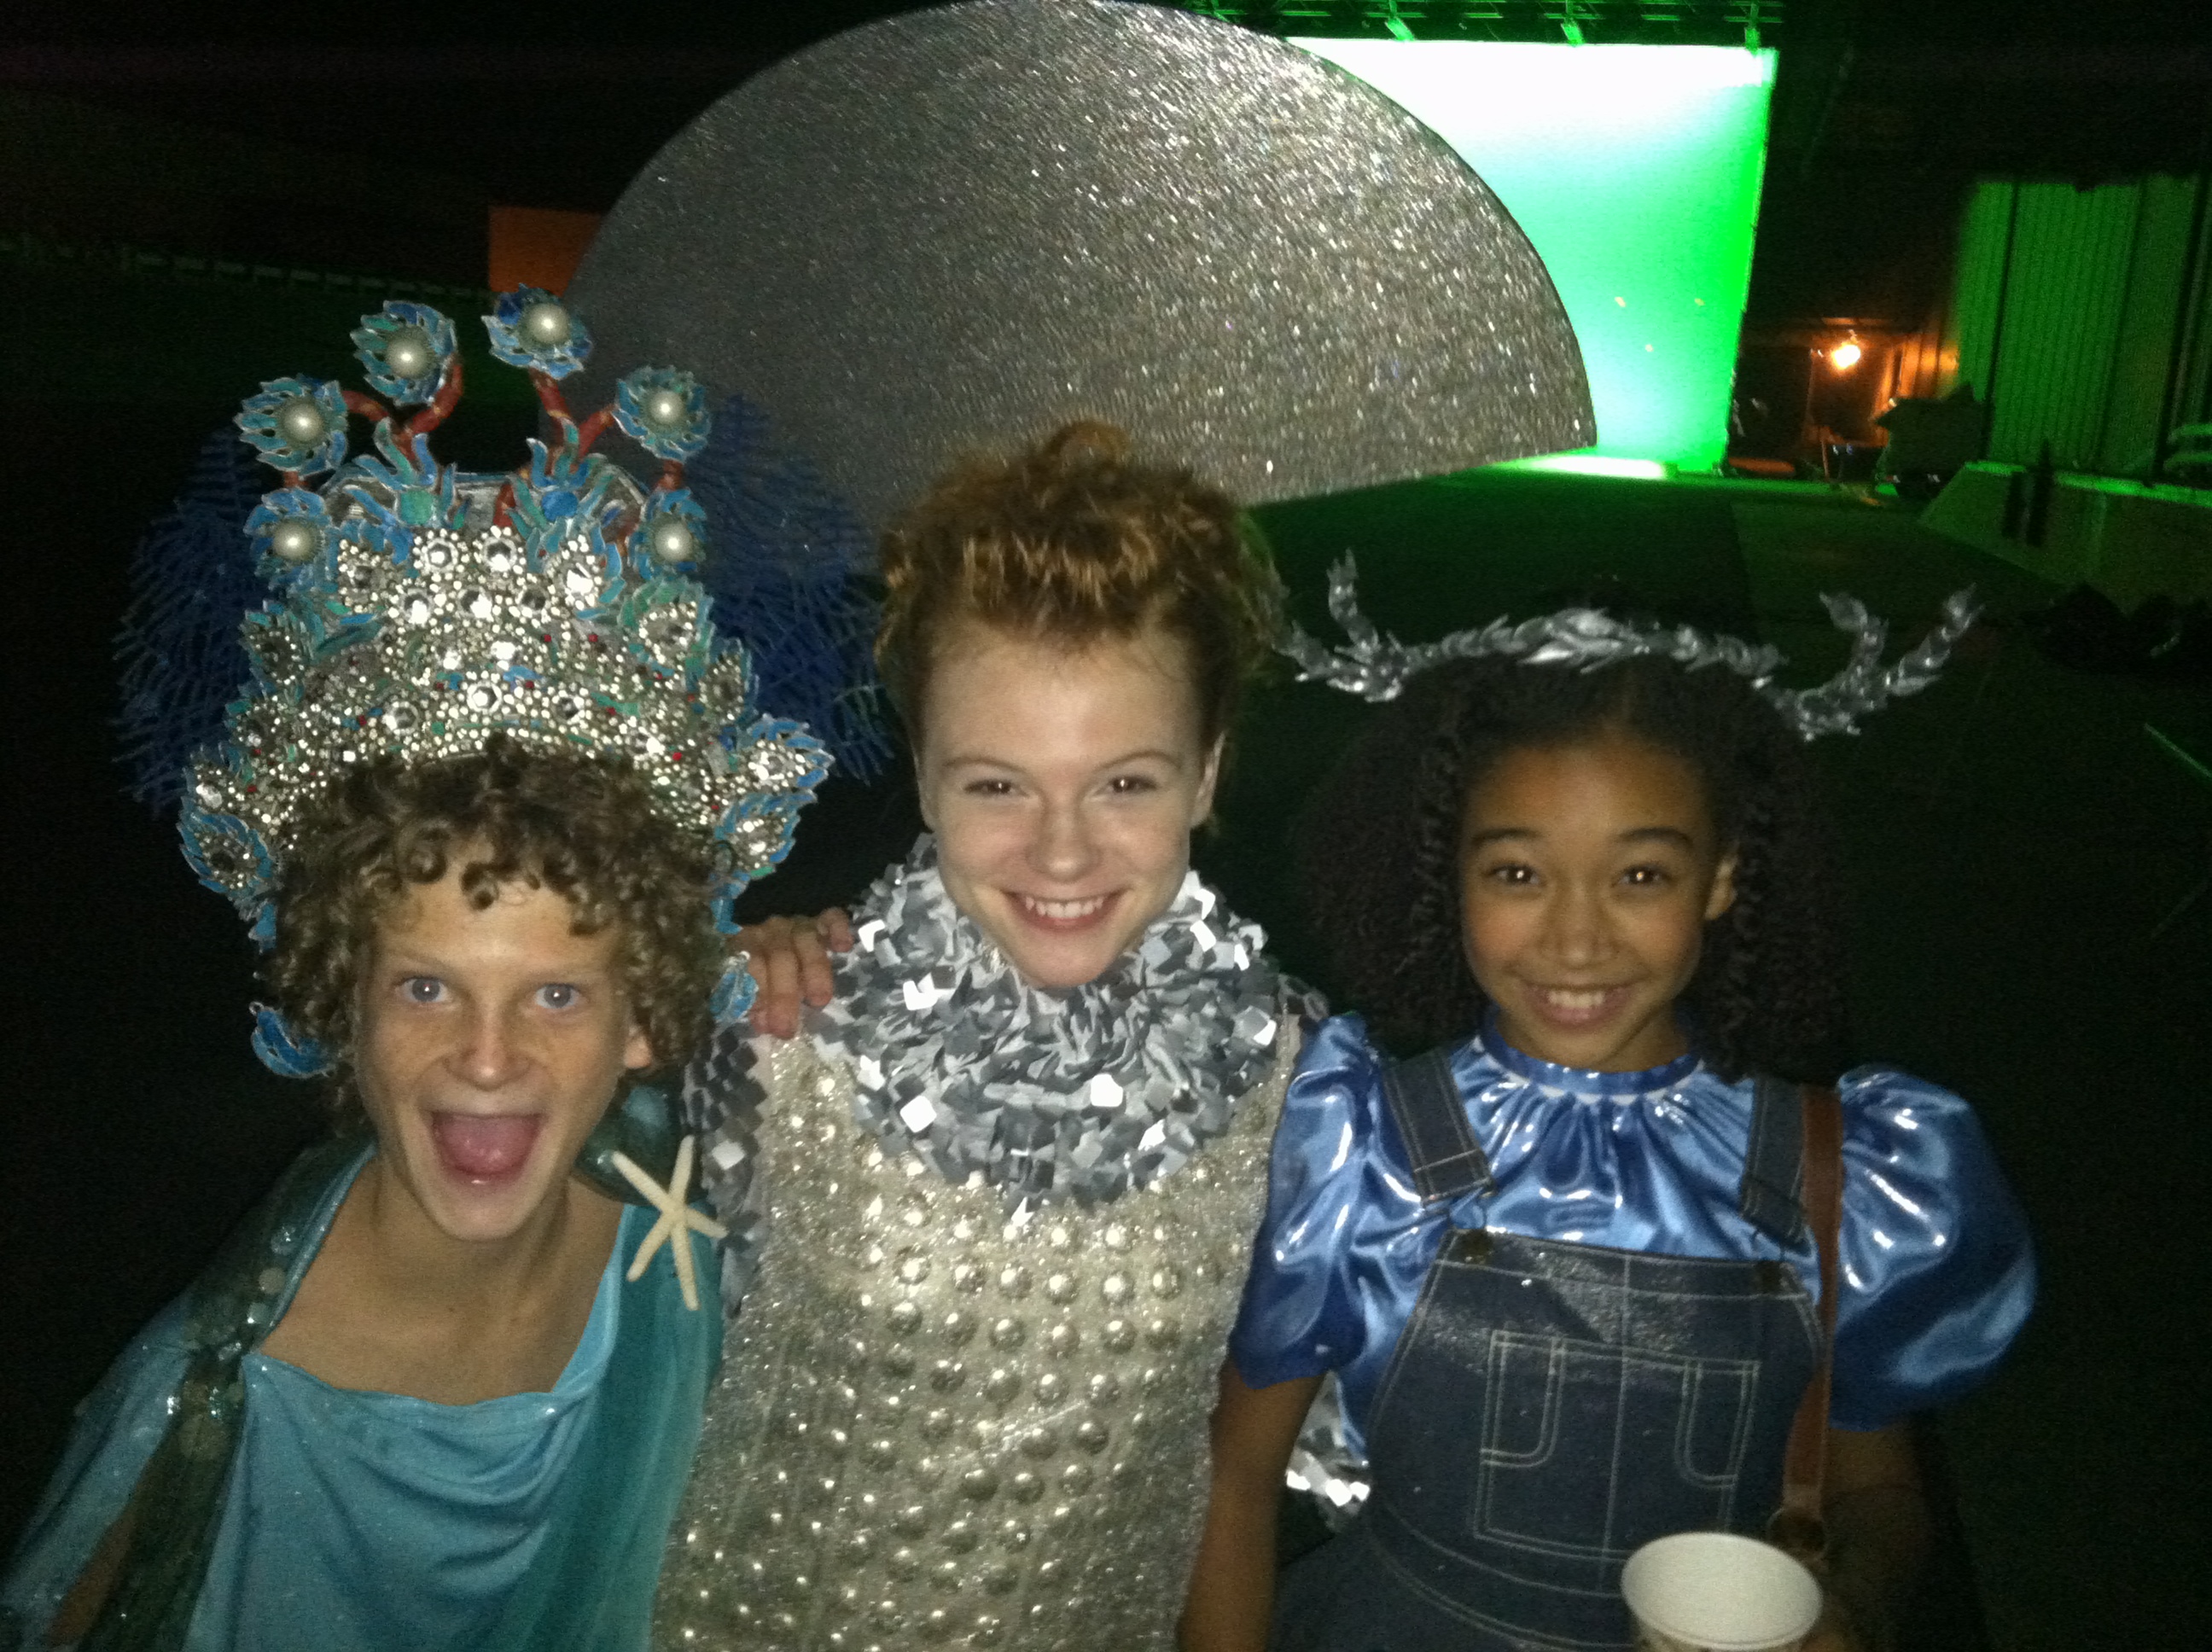 Annie Thurman with Amandla Stenberg and Ethan Jamieson on set for The Hunger Games